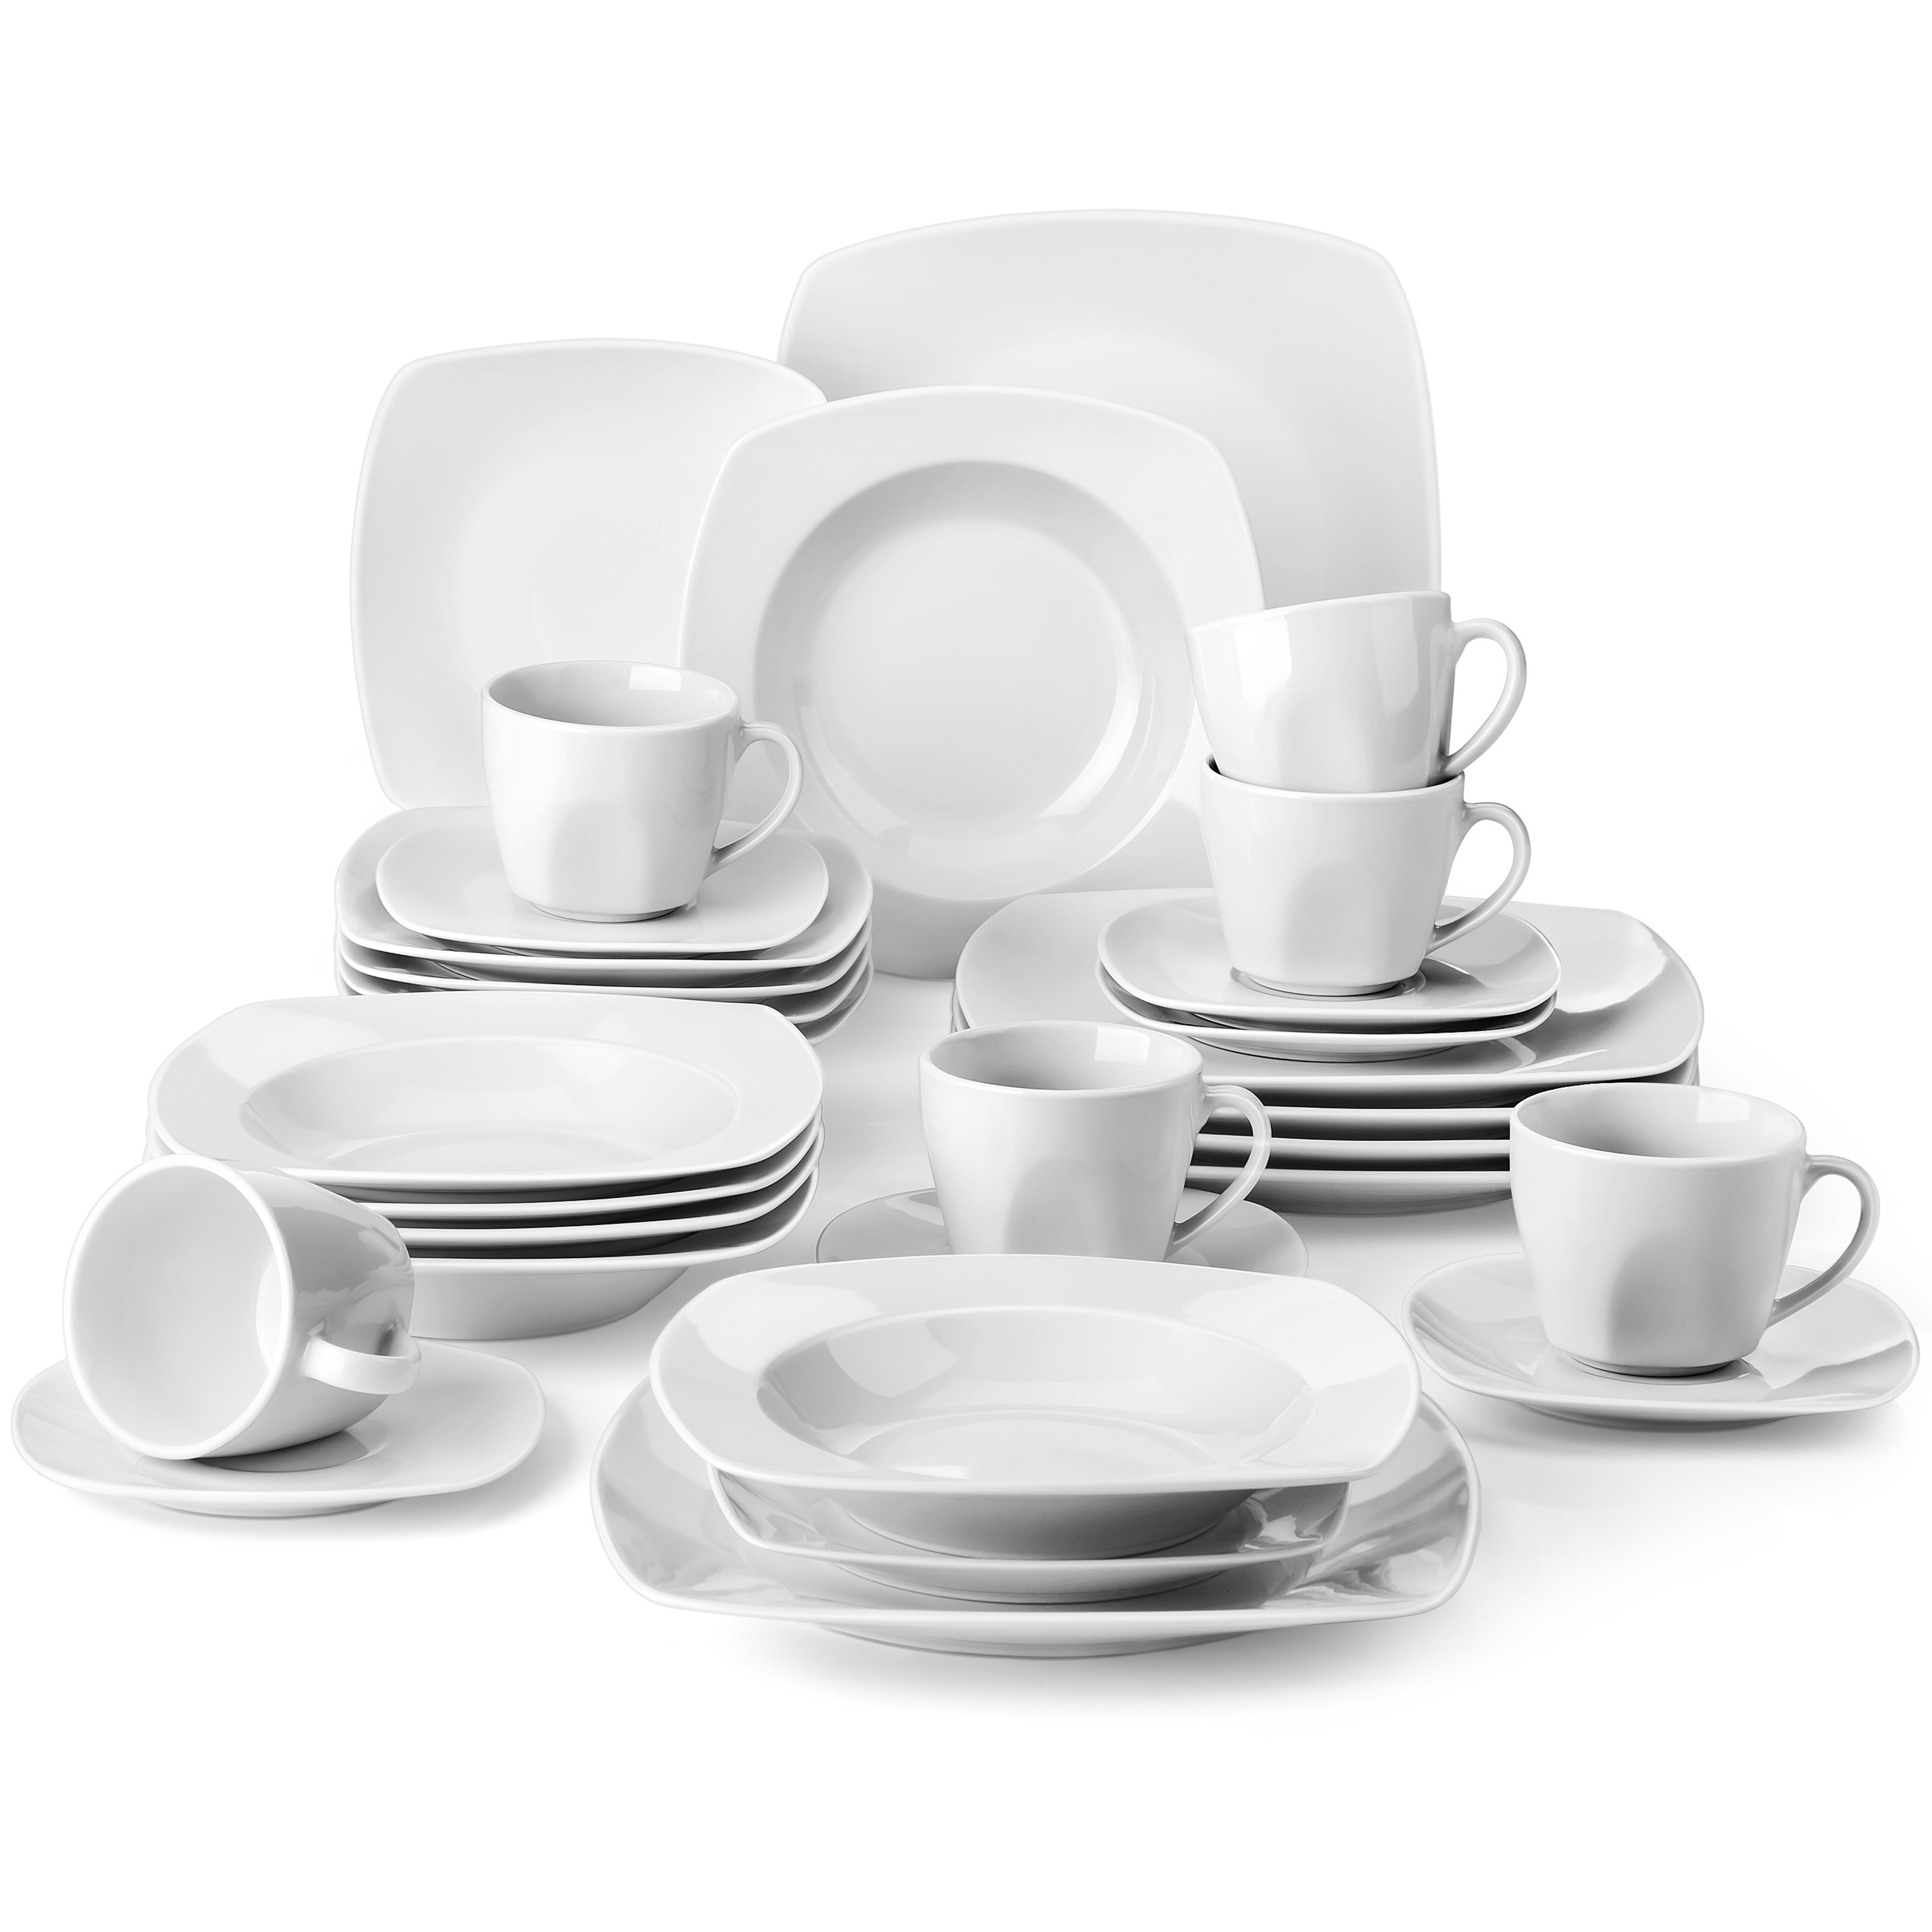 

30pcs, Dinnerware Sets, Porcelain Plates And Bowls Sets Ivory White Tableware Service For 6, For Home Kitchen Restaurant Hotel, Kitchen Supplies, Tableware Accessories